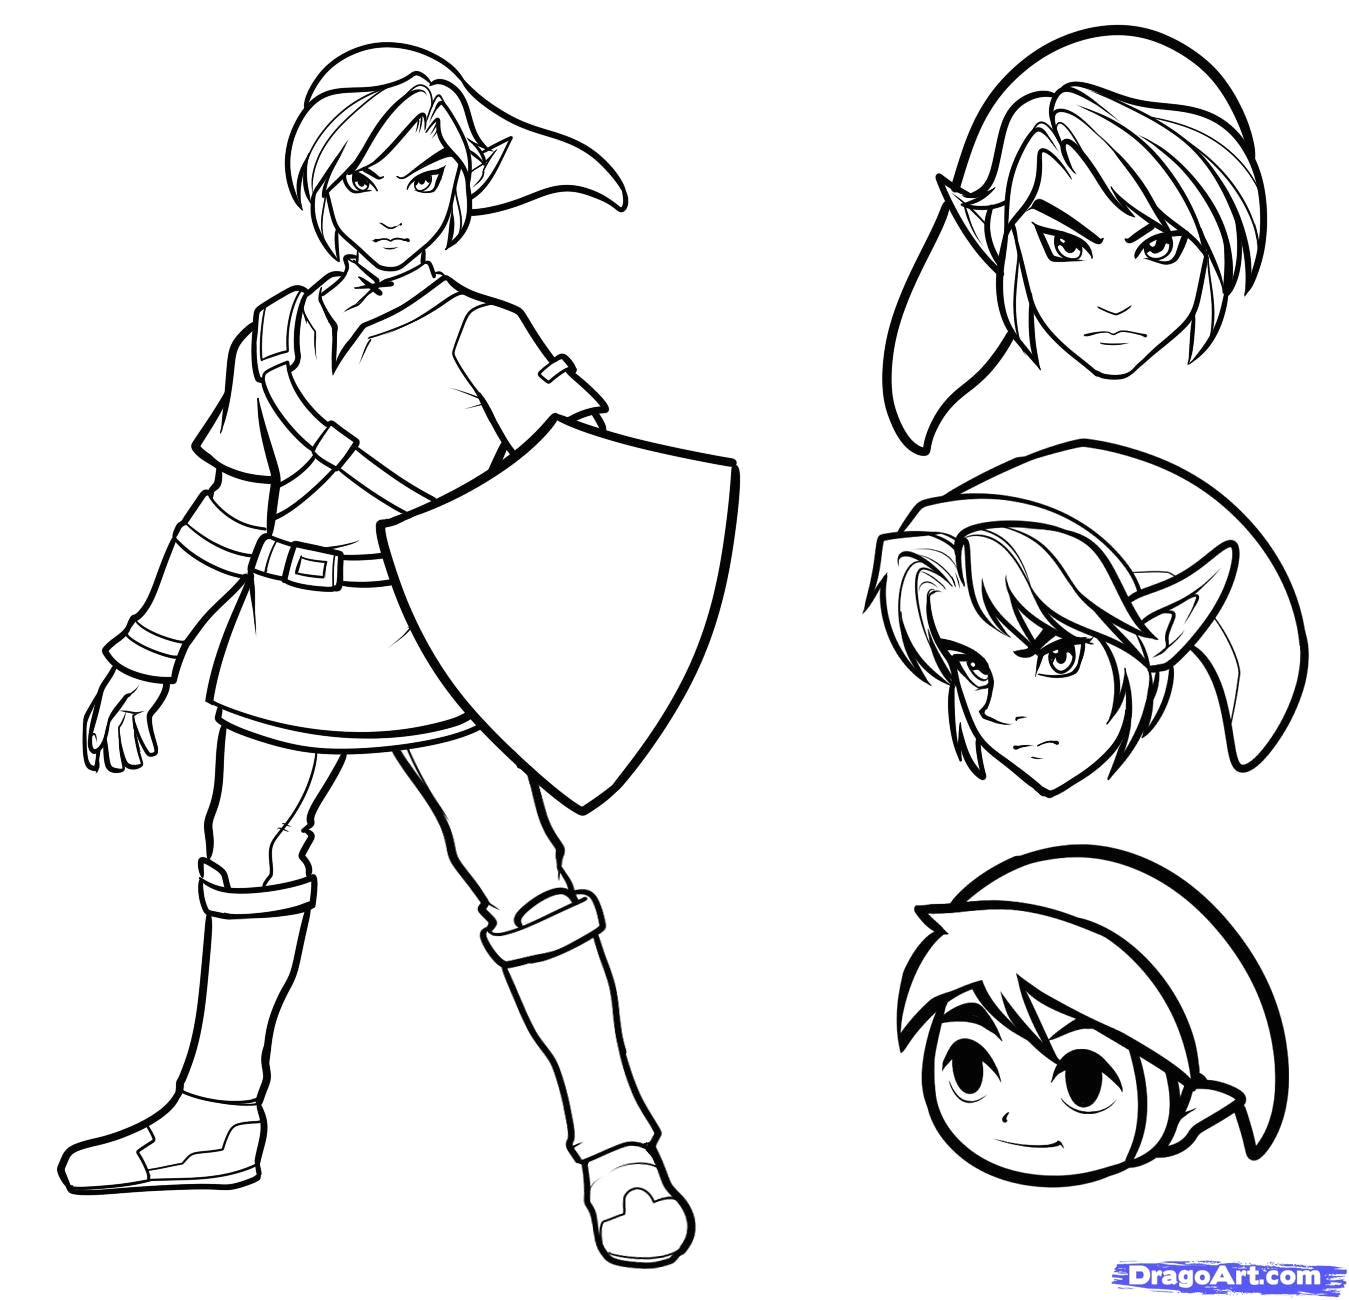 Easy Legend Of Zelda Drawings How to Draw Link Easy Step 9 Phots Drawings Easy Drawings